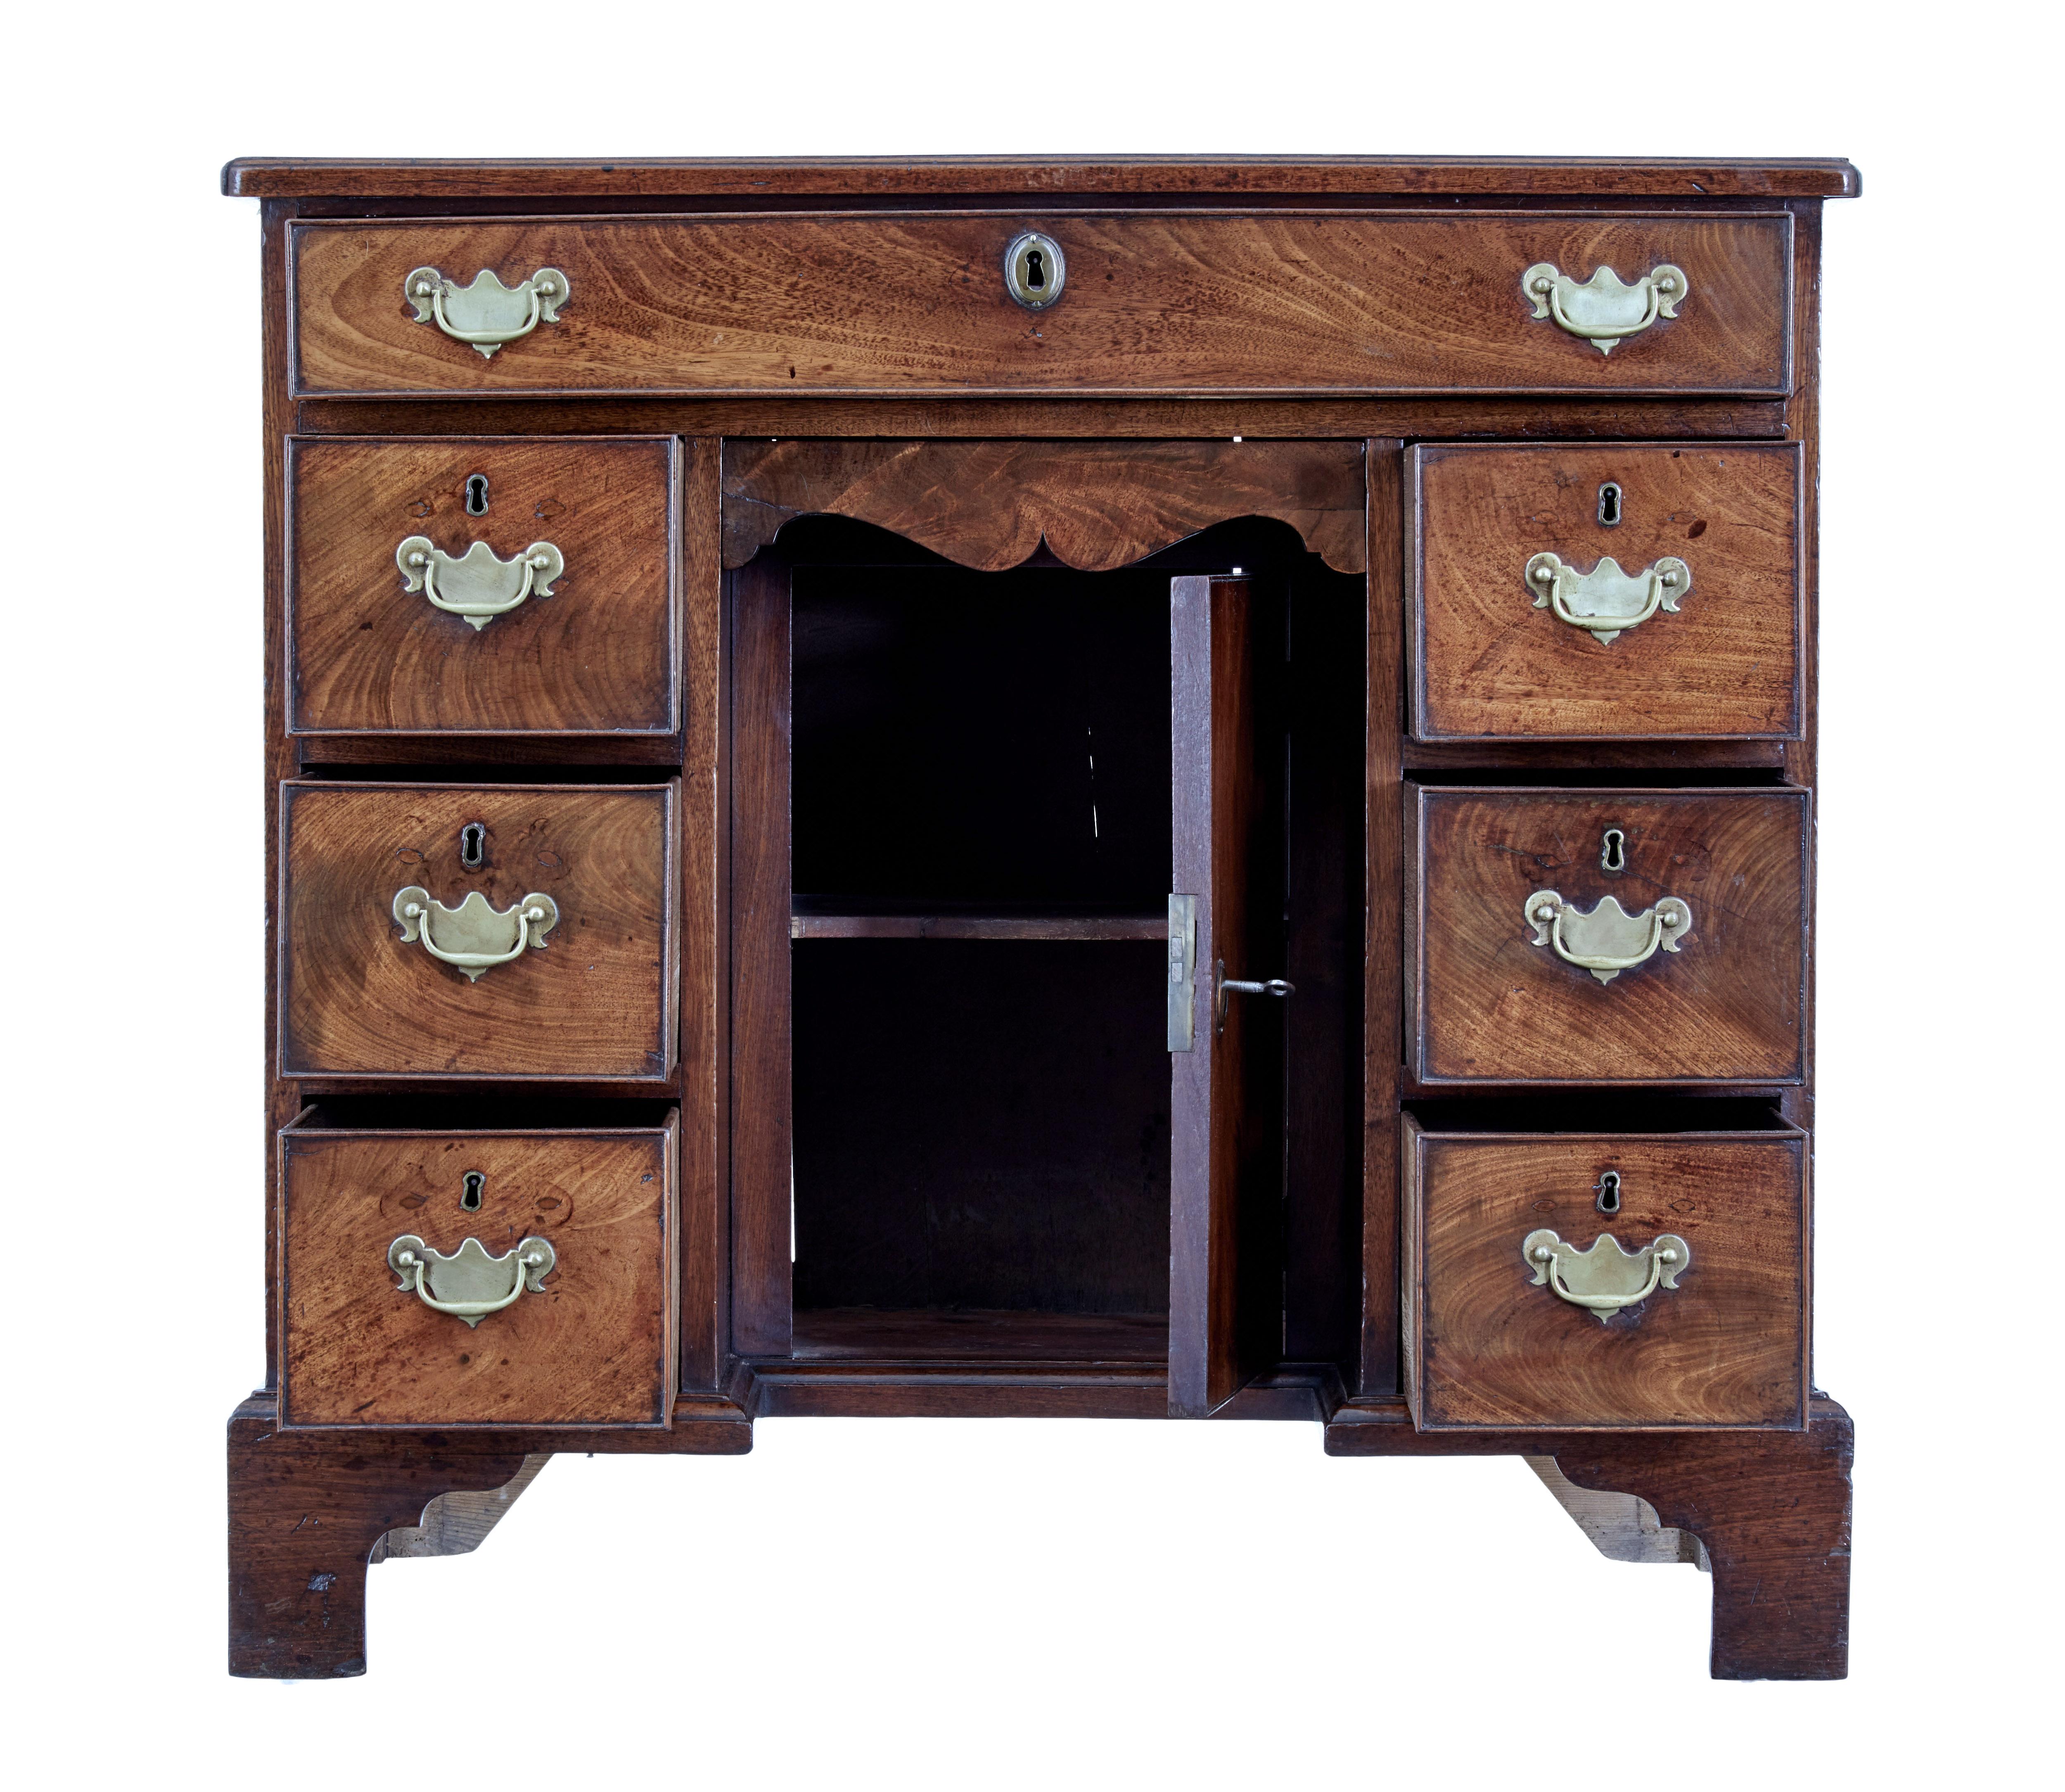 Mid 18th century mahogany kneehole desk circa 1750.

Georgian mahogany kneehole desk or writing table with 1 piece writing surface.   Central kneehole with cupboard and a shaped drawer above the knee is flanked either side by a bank of 3 drawers,